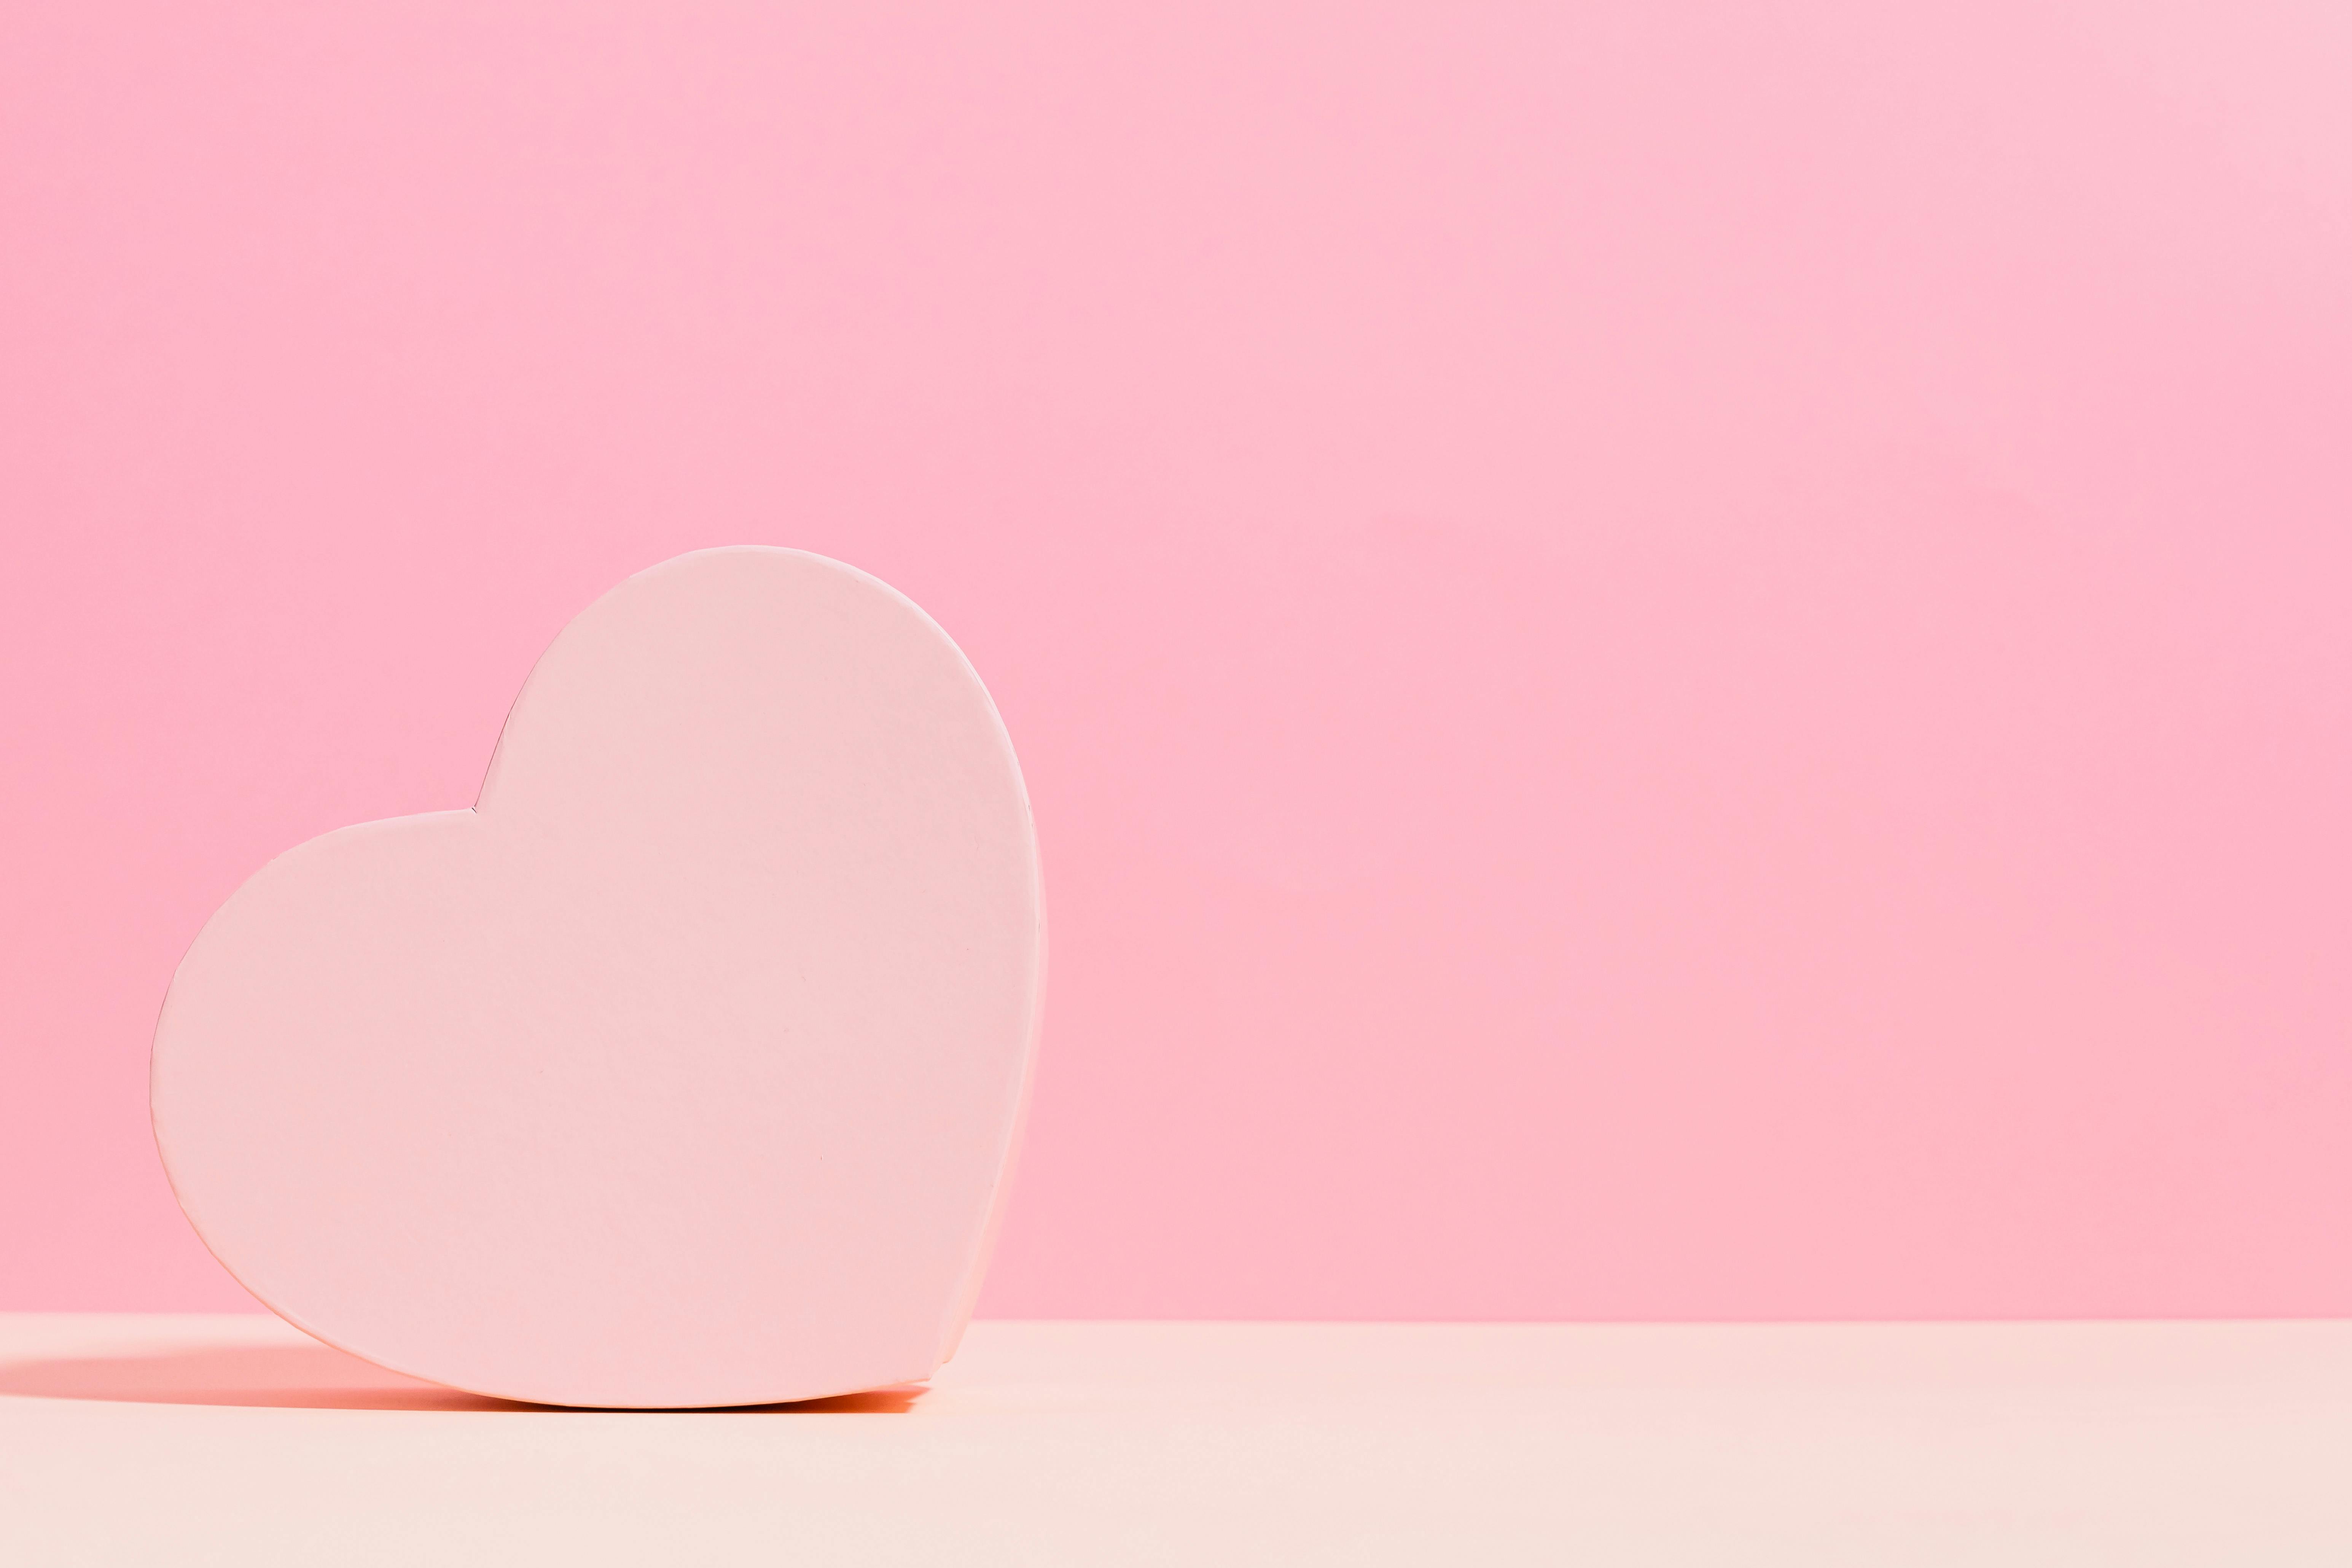 Love Heart on a Pink Background · Free Stock Photo